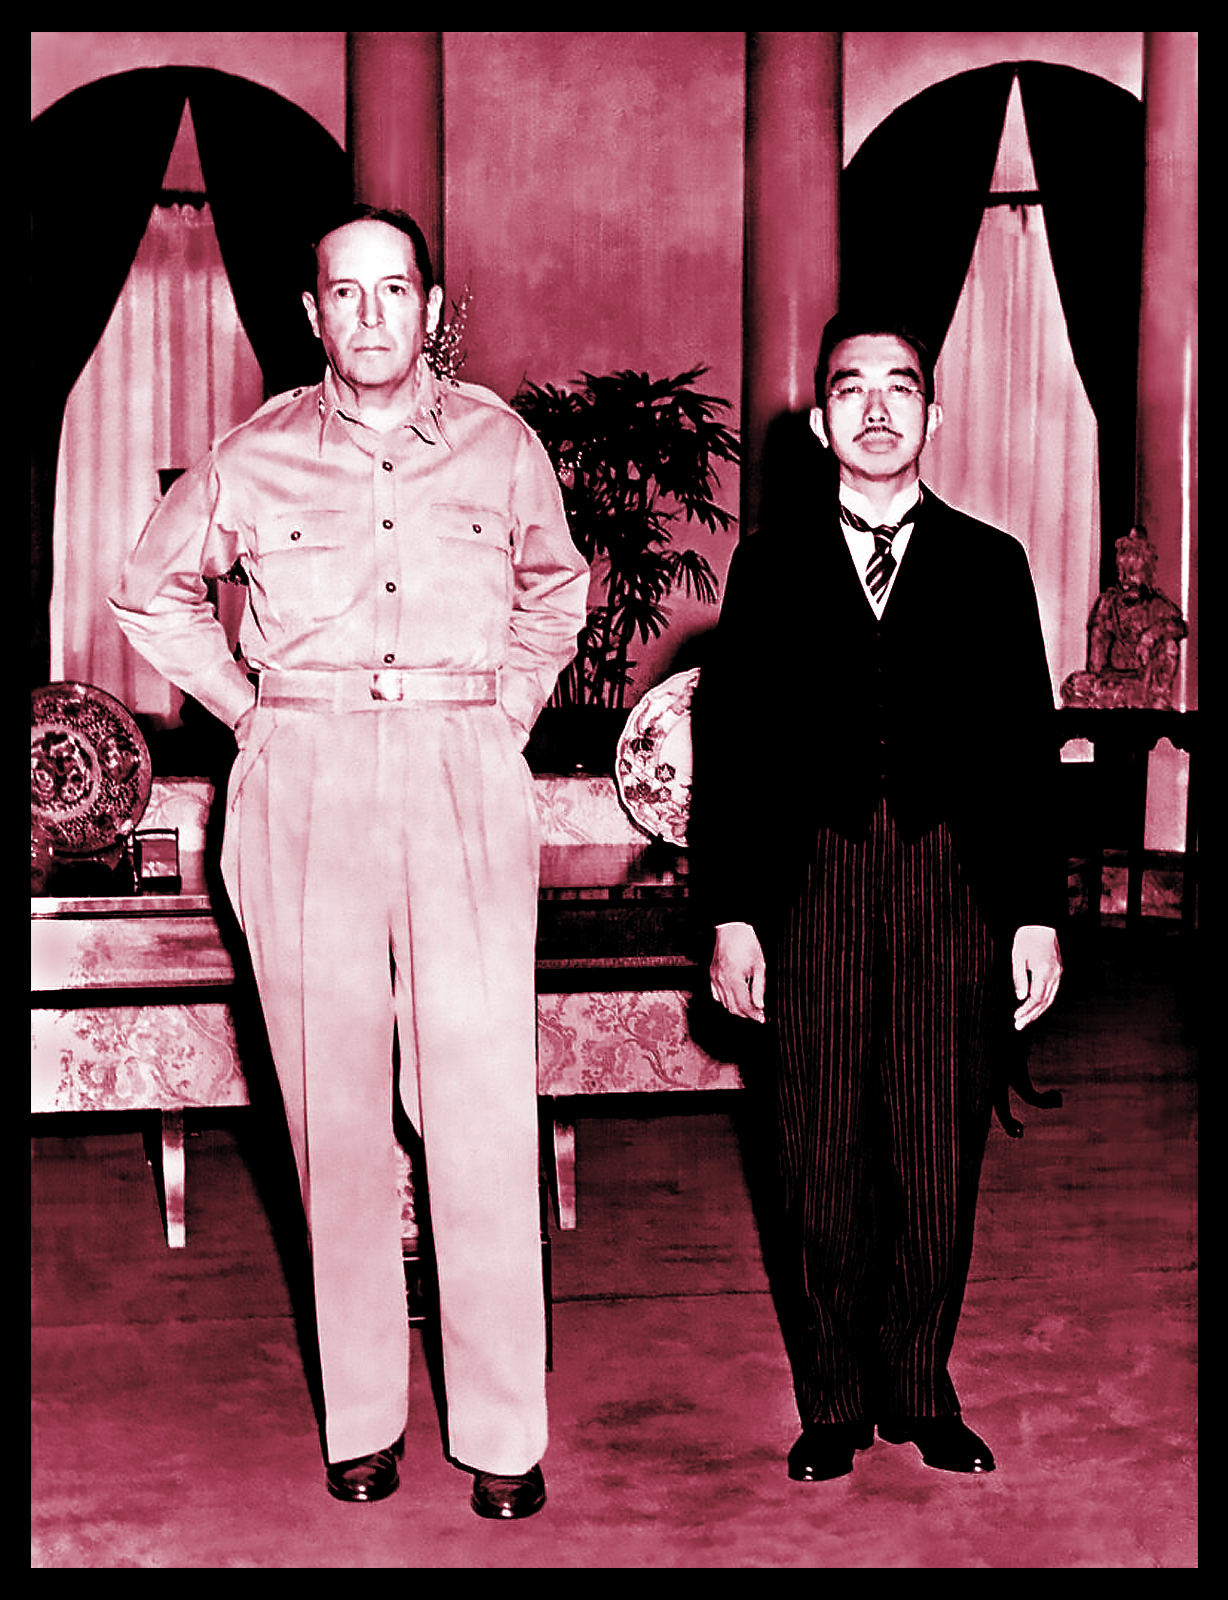 Gen. Douglas MacArthur and Emperor Hirohito of Japan from manhhai on Flicker, edited by Celine Calpo